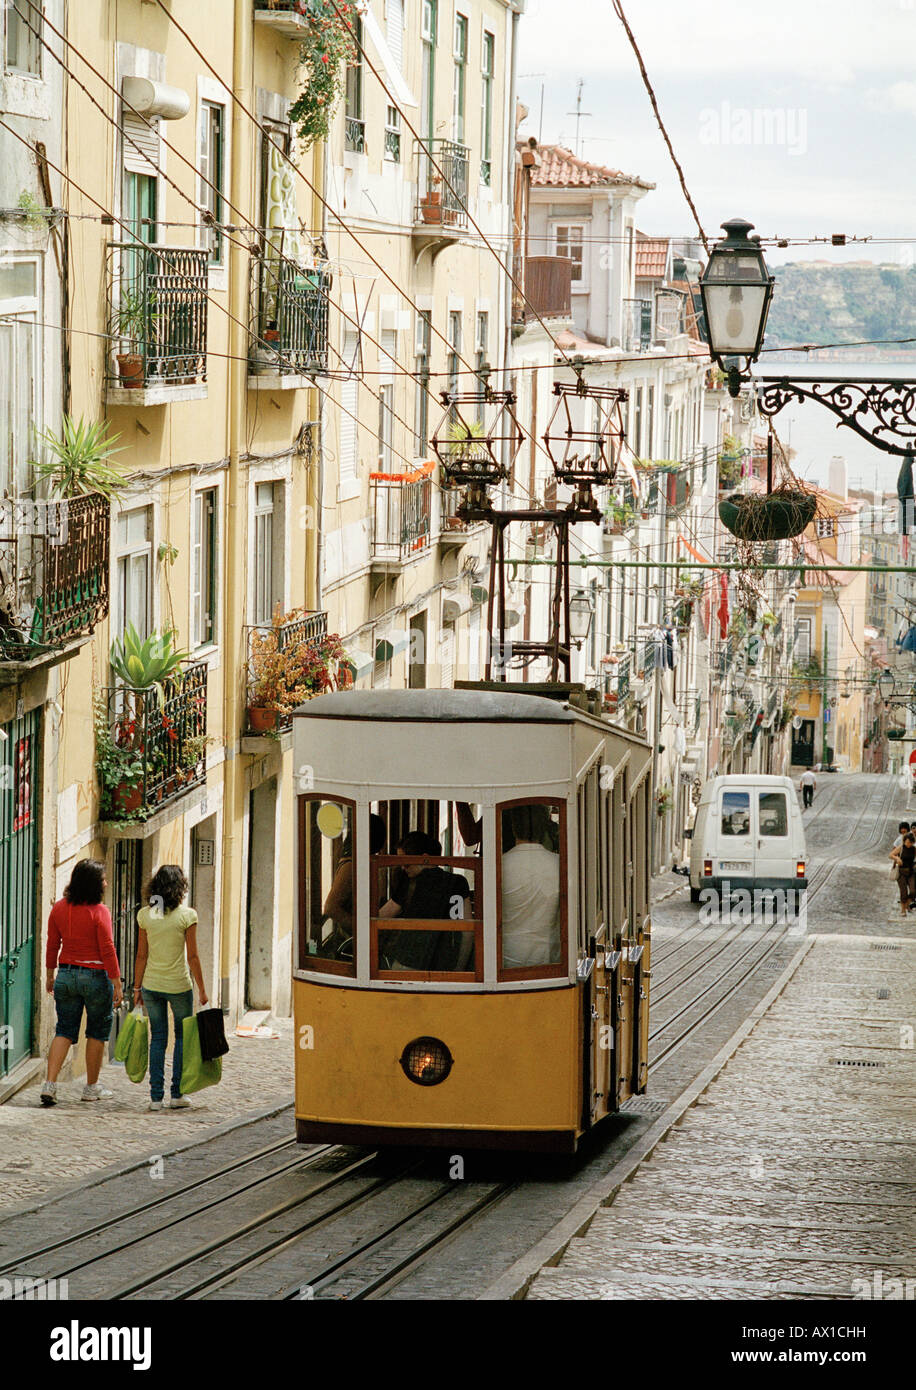 A tram on a street in Lisbon, Portugal Stock Photo